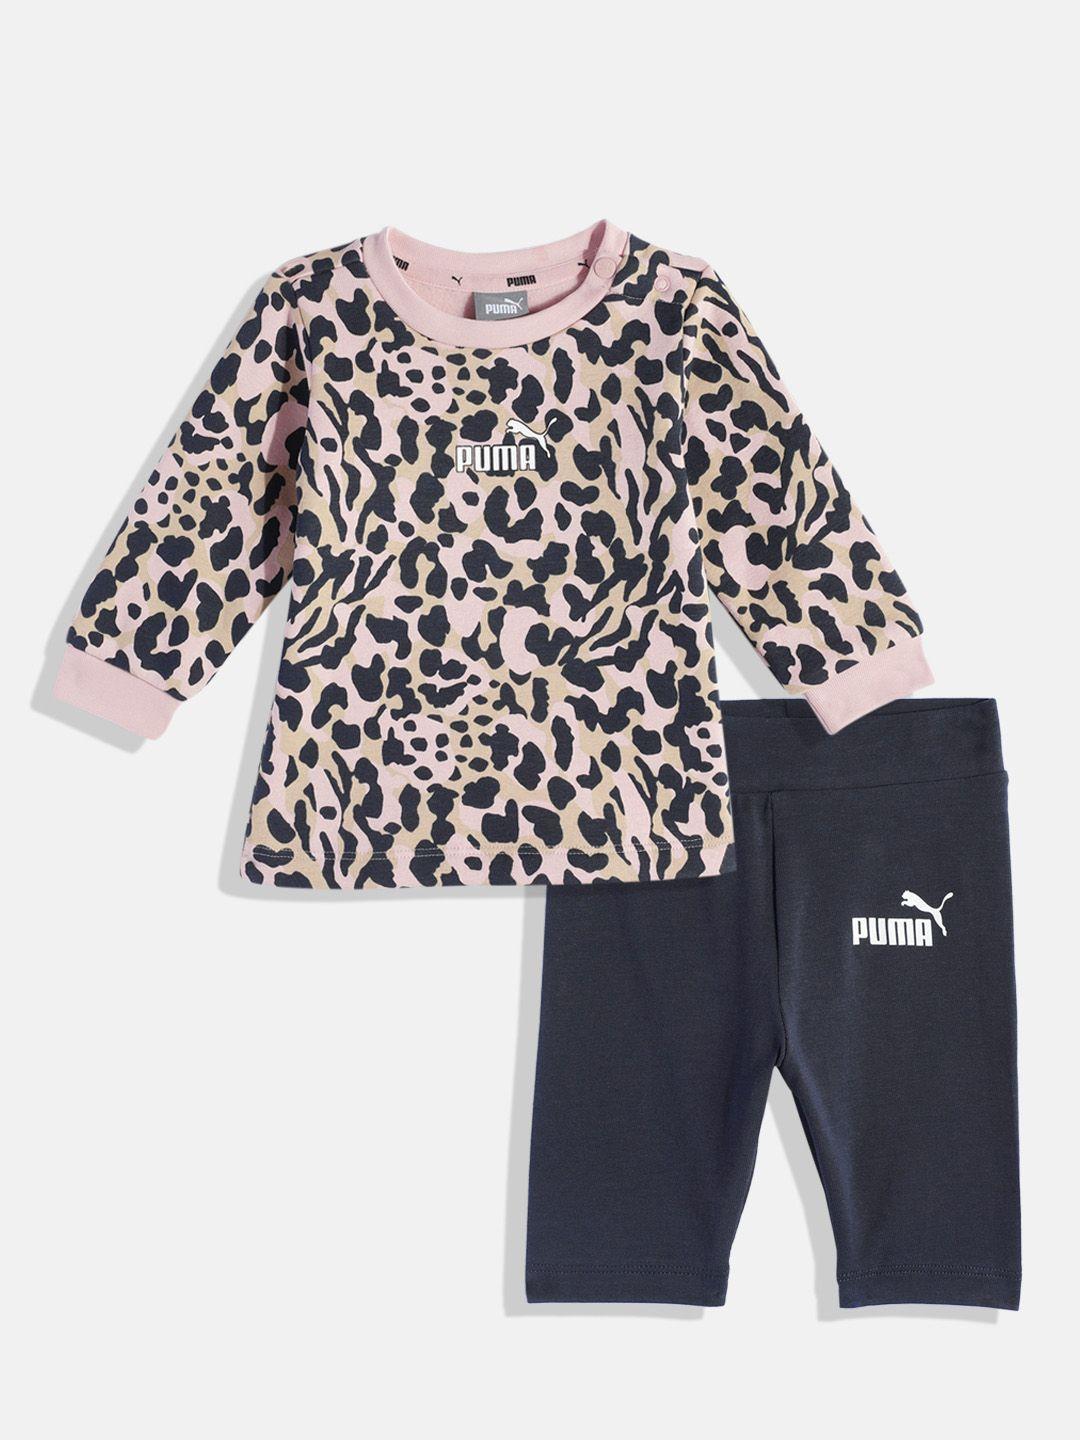 puma-infant-nude-pink-camouflage-printed-t-shirt-with-navy-blue-shorts